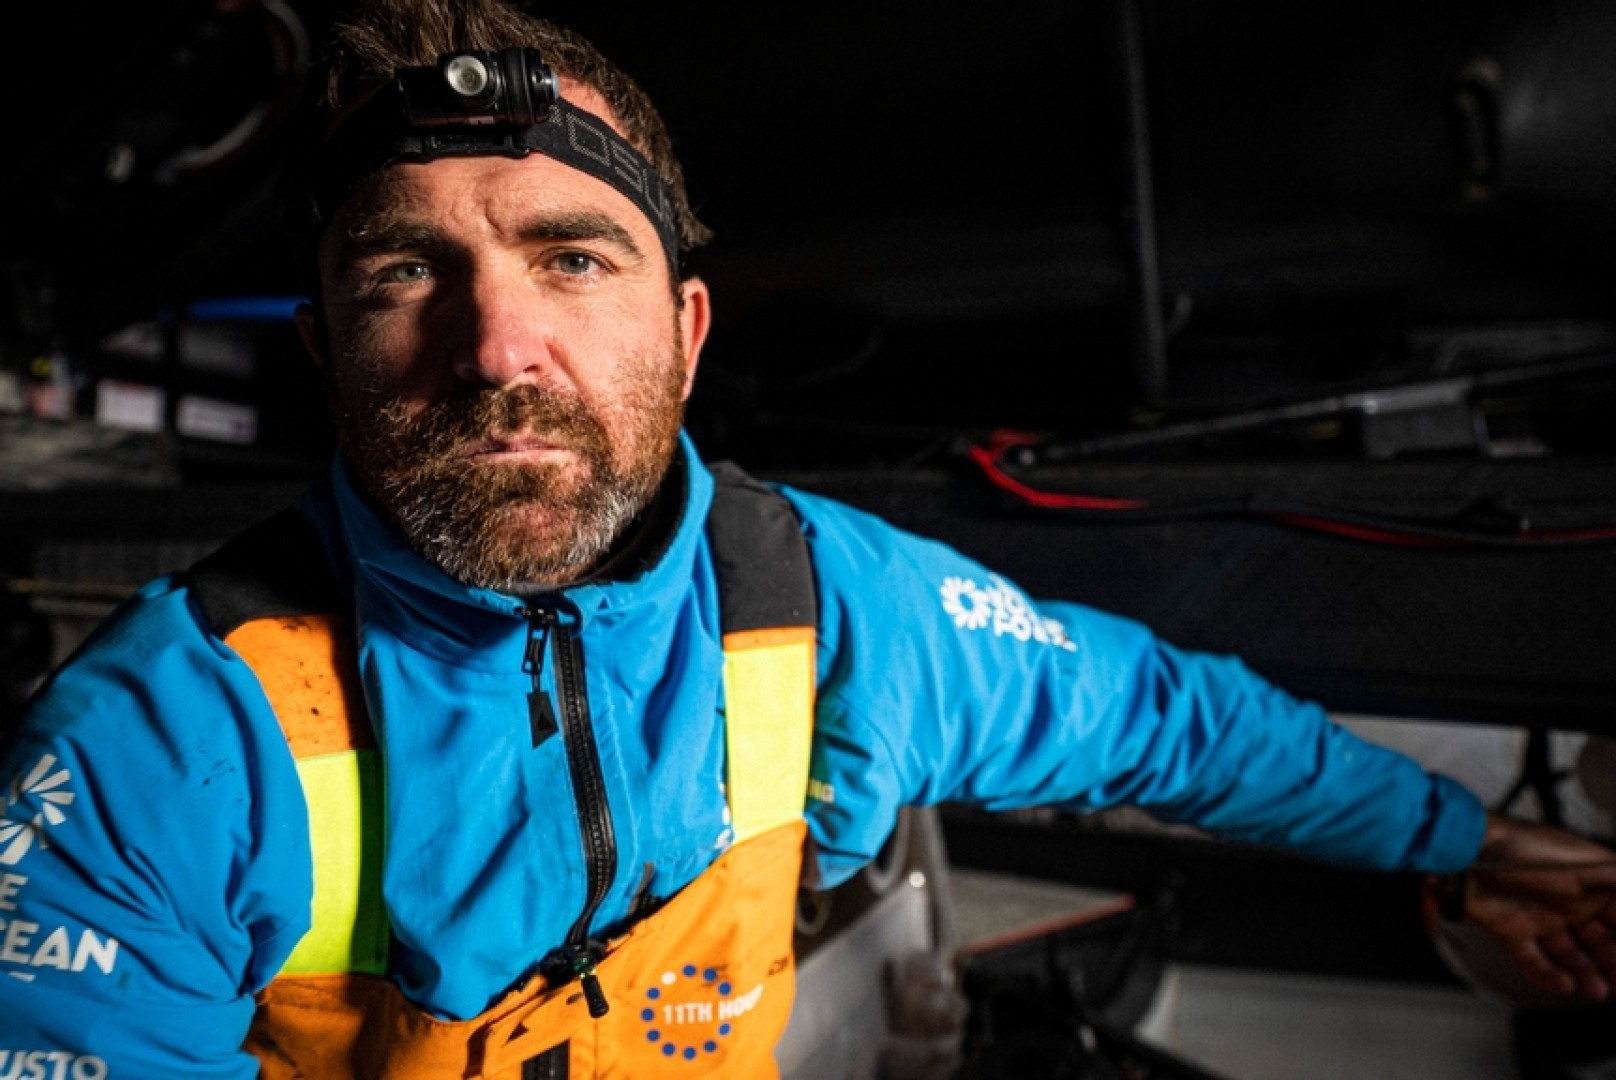 © Amory Ross / 11th Hour Racing / The Ocean Race